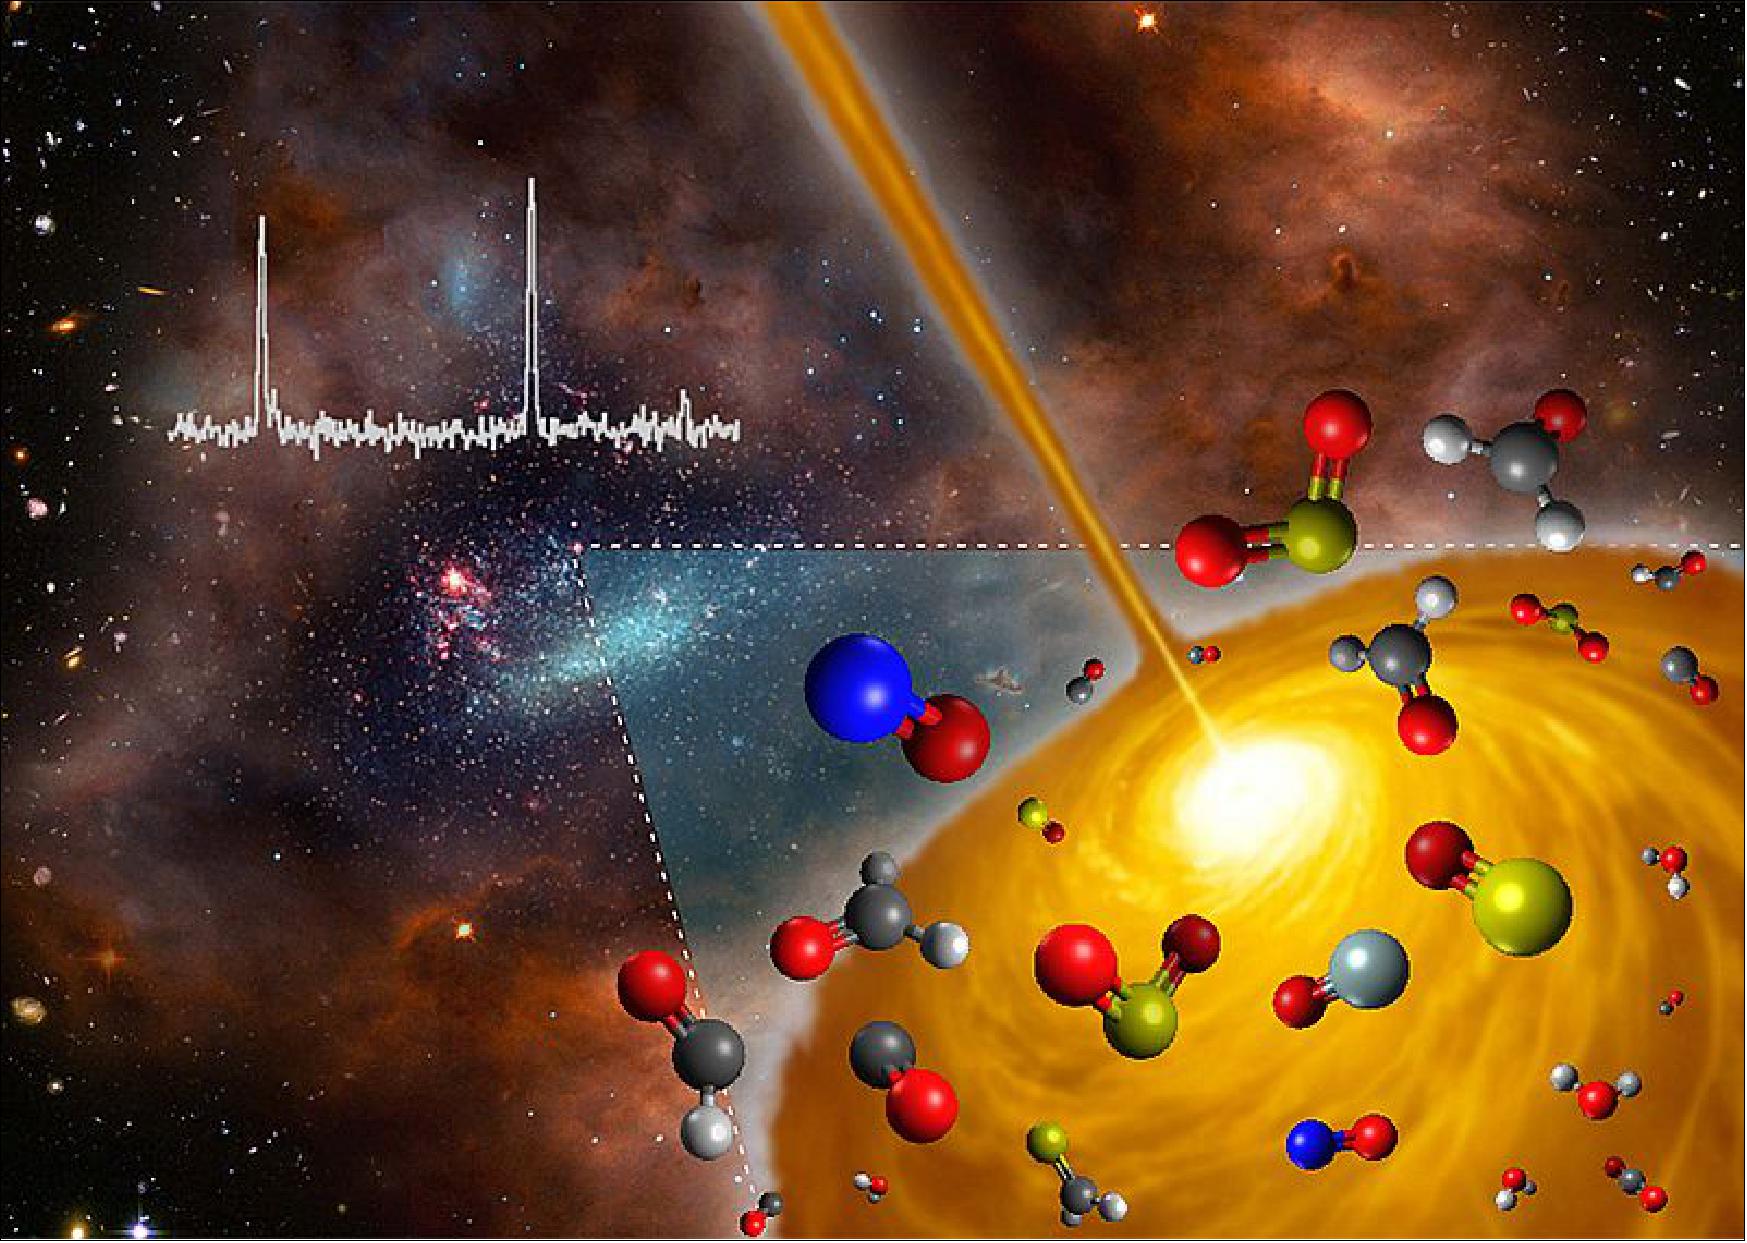 Figure 46: Artist's concept image of the hot molecular core discovered in the Large Magellanic Cloud [image credit: RIS/Tohoku University. The figure is a derivative work of the following sources (ESO/M. Kornmesser; NASA, ESA, and S. Beckwith (STScI) and the HUDF Team; NASA/ESA and the Hubble Heritage Team (AURA/STScI)/HEI]